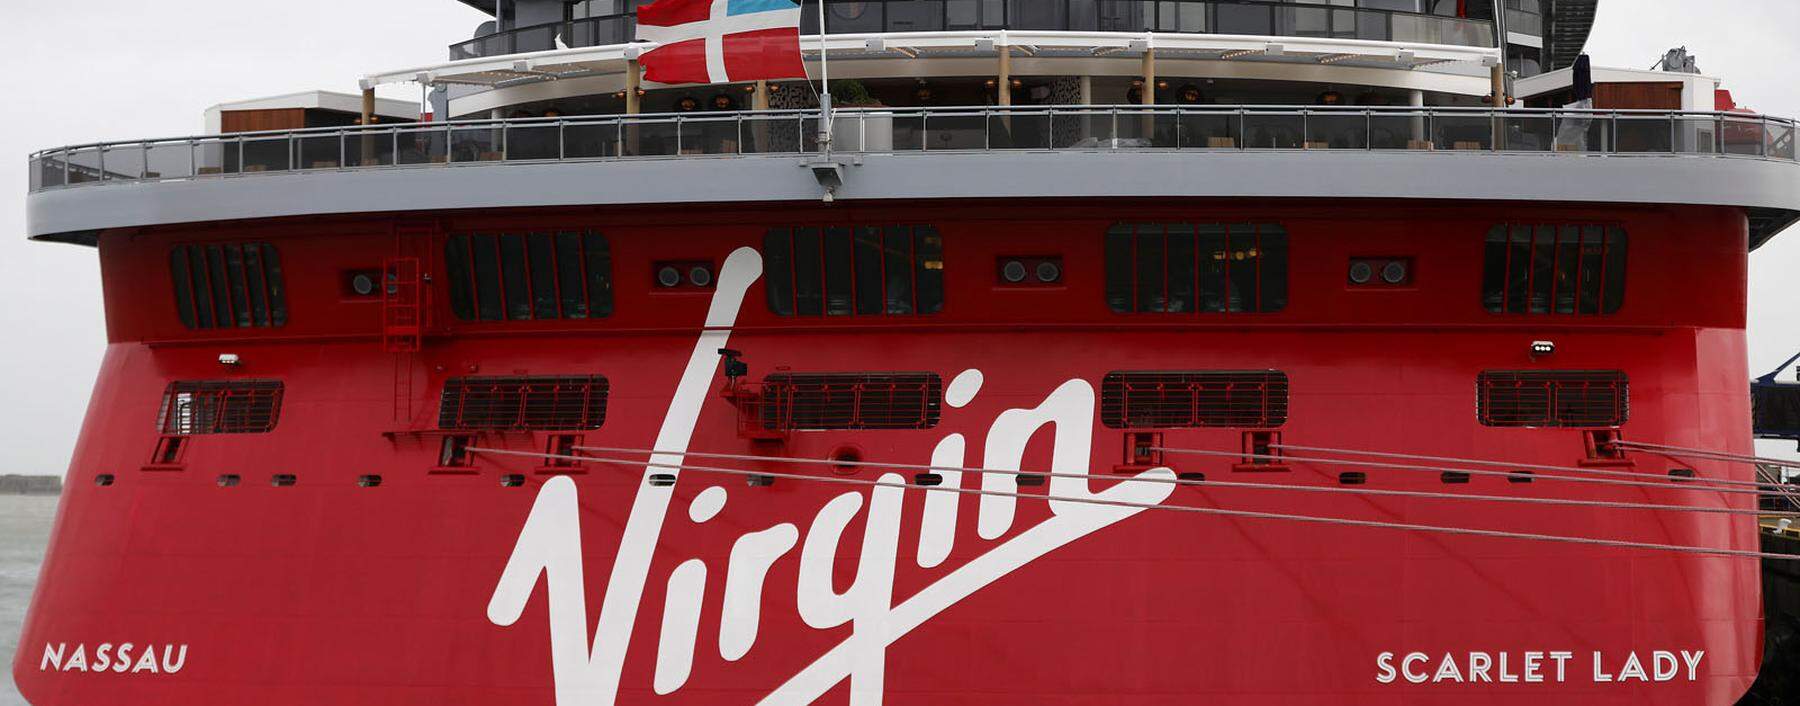 The Virgin Voyages Scarlet Lady cruise liner sits docked at Dover Port in Dover